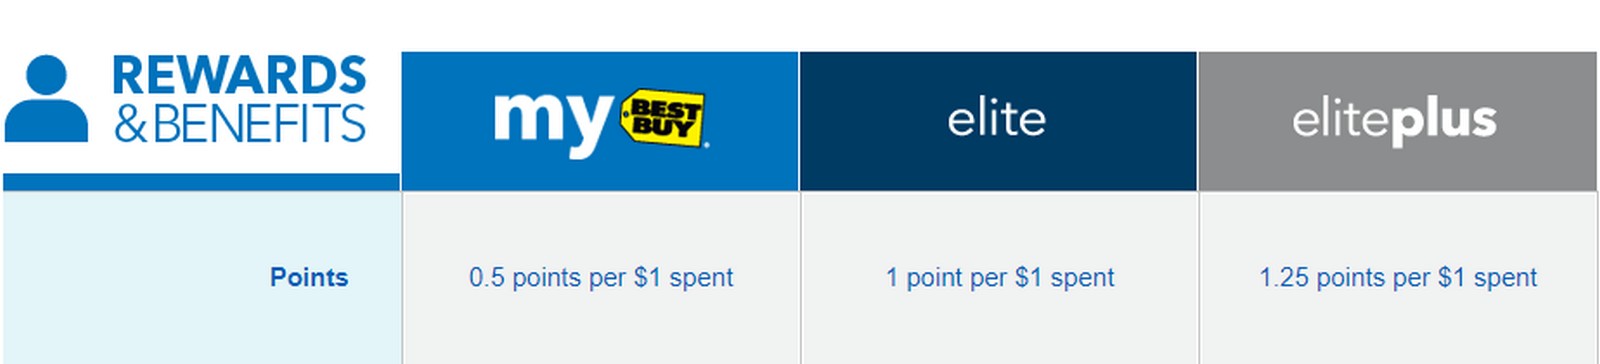 Maximizing Best Buy Gift Card Sales